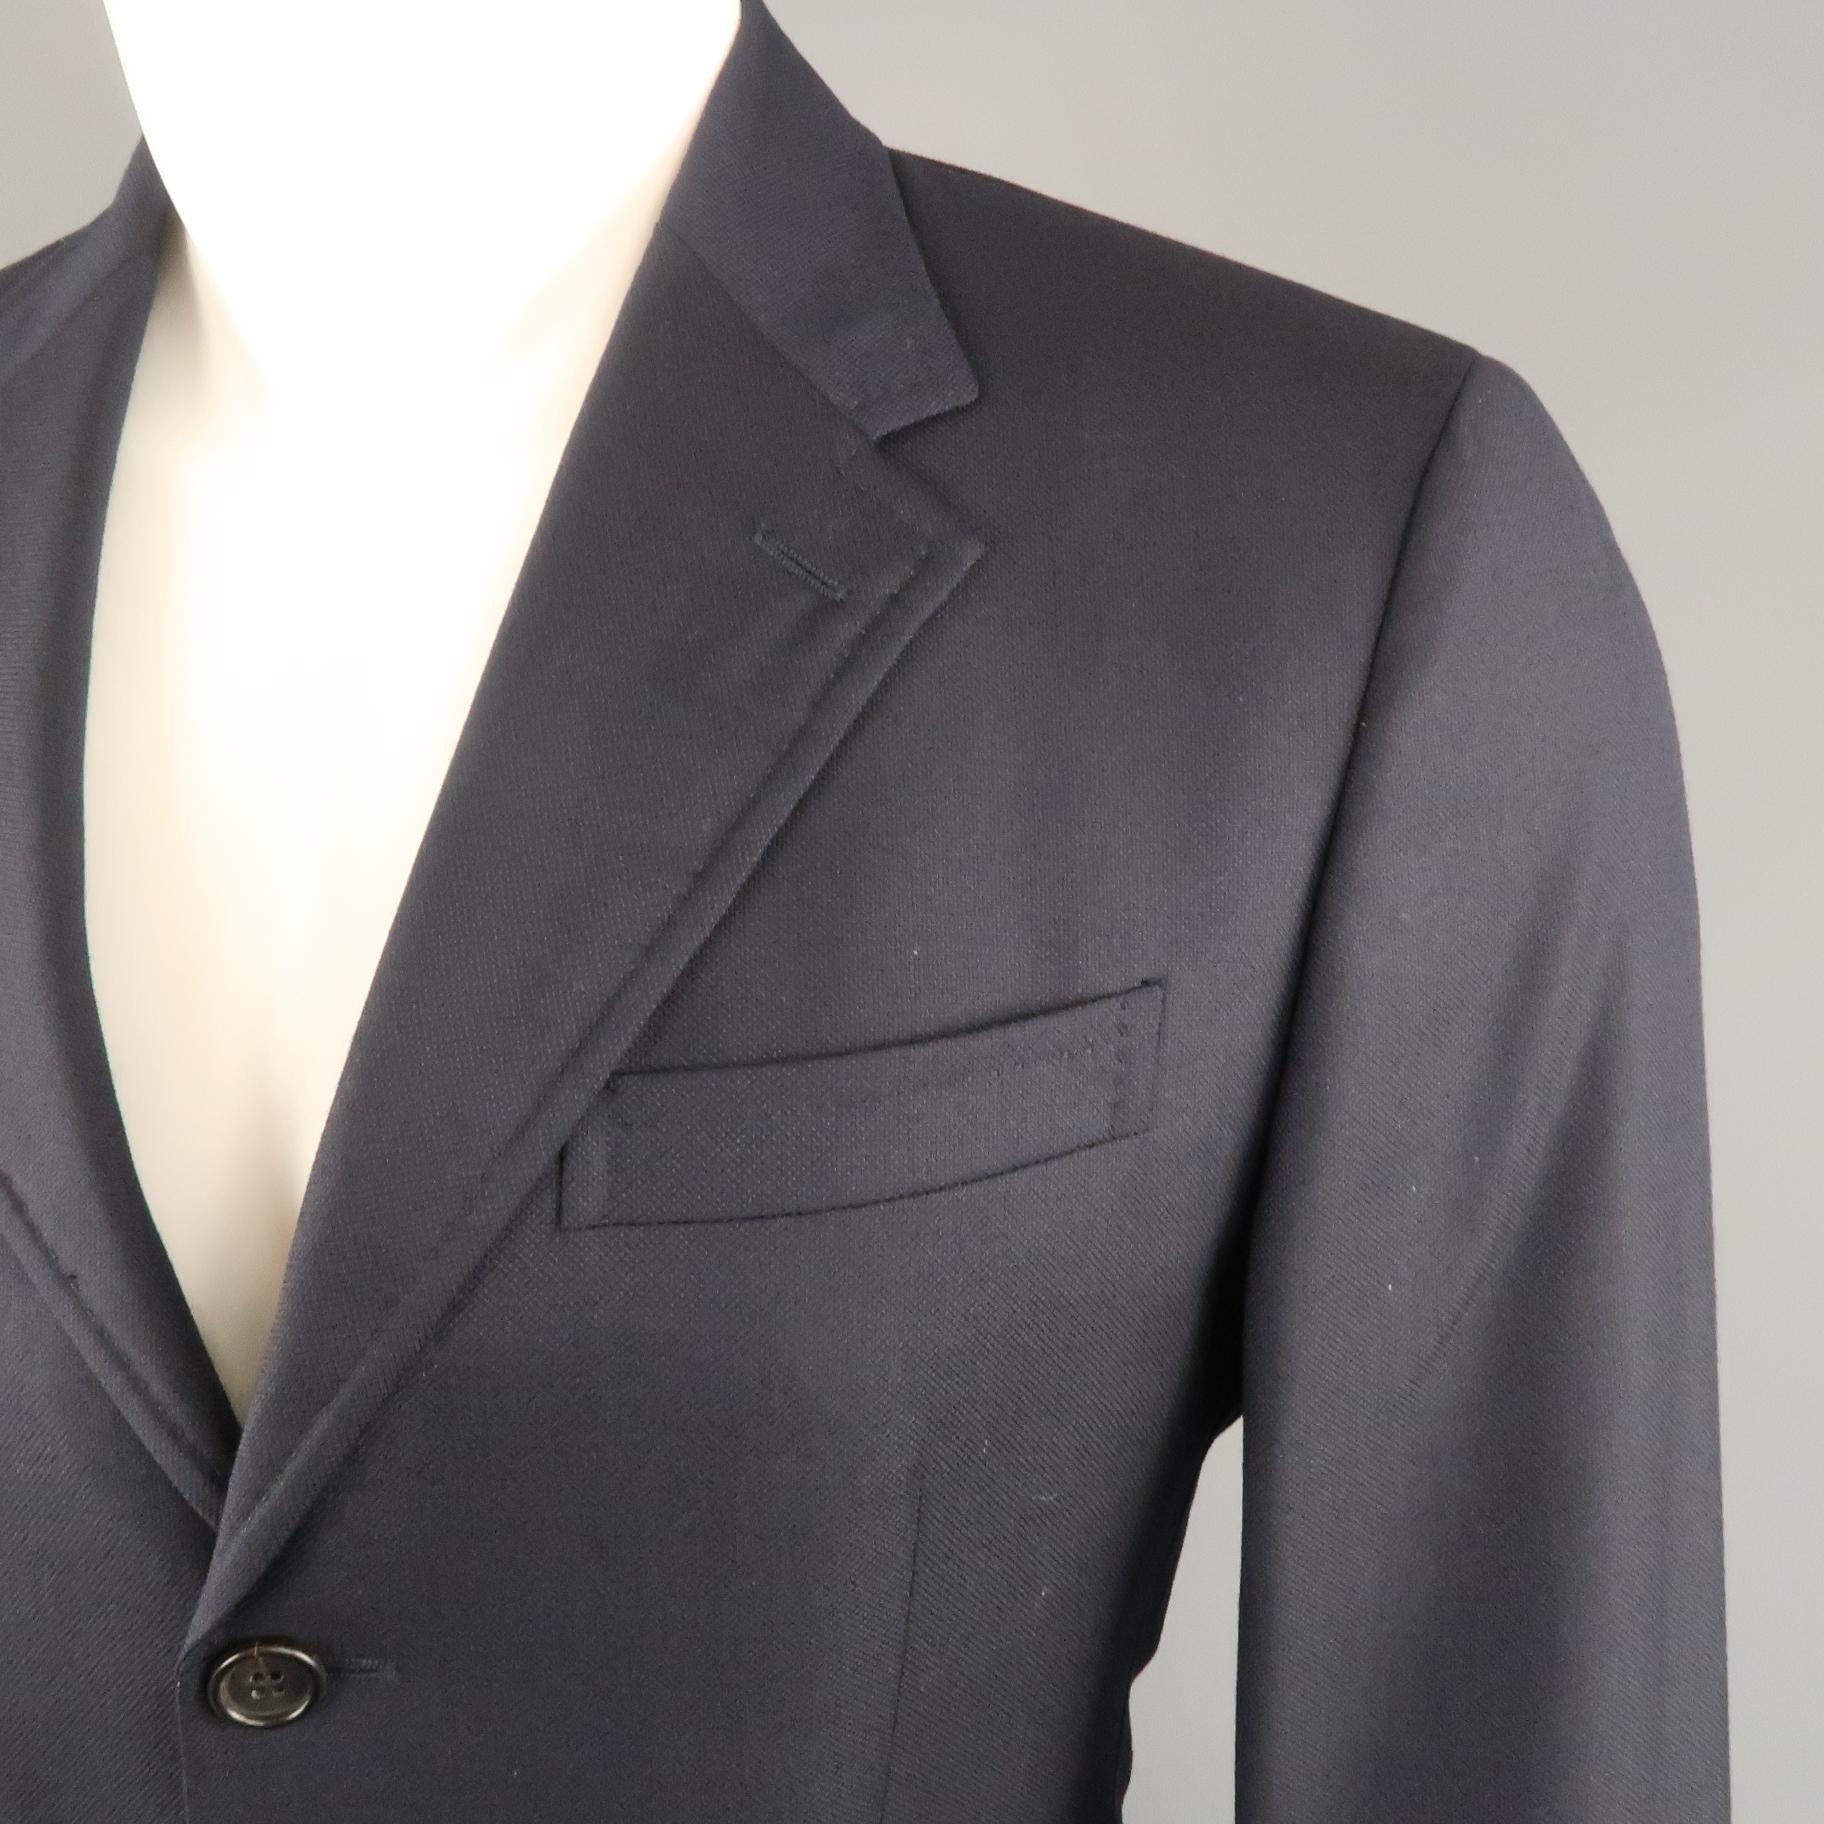 PRADA sport coat comes in navy woven textured wool with a notch lapel, single breasted,  three button front, and flap pockets. Made in Italy.
 
Very Good Pre-Owned Condition.
Marked: IT 48
 
Measurements:
 
Shoulder: 17 in.
Chest: 40 in.
Sleeve: 25